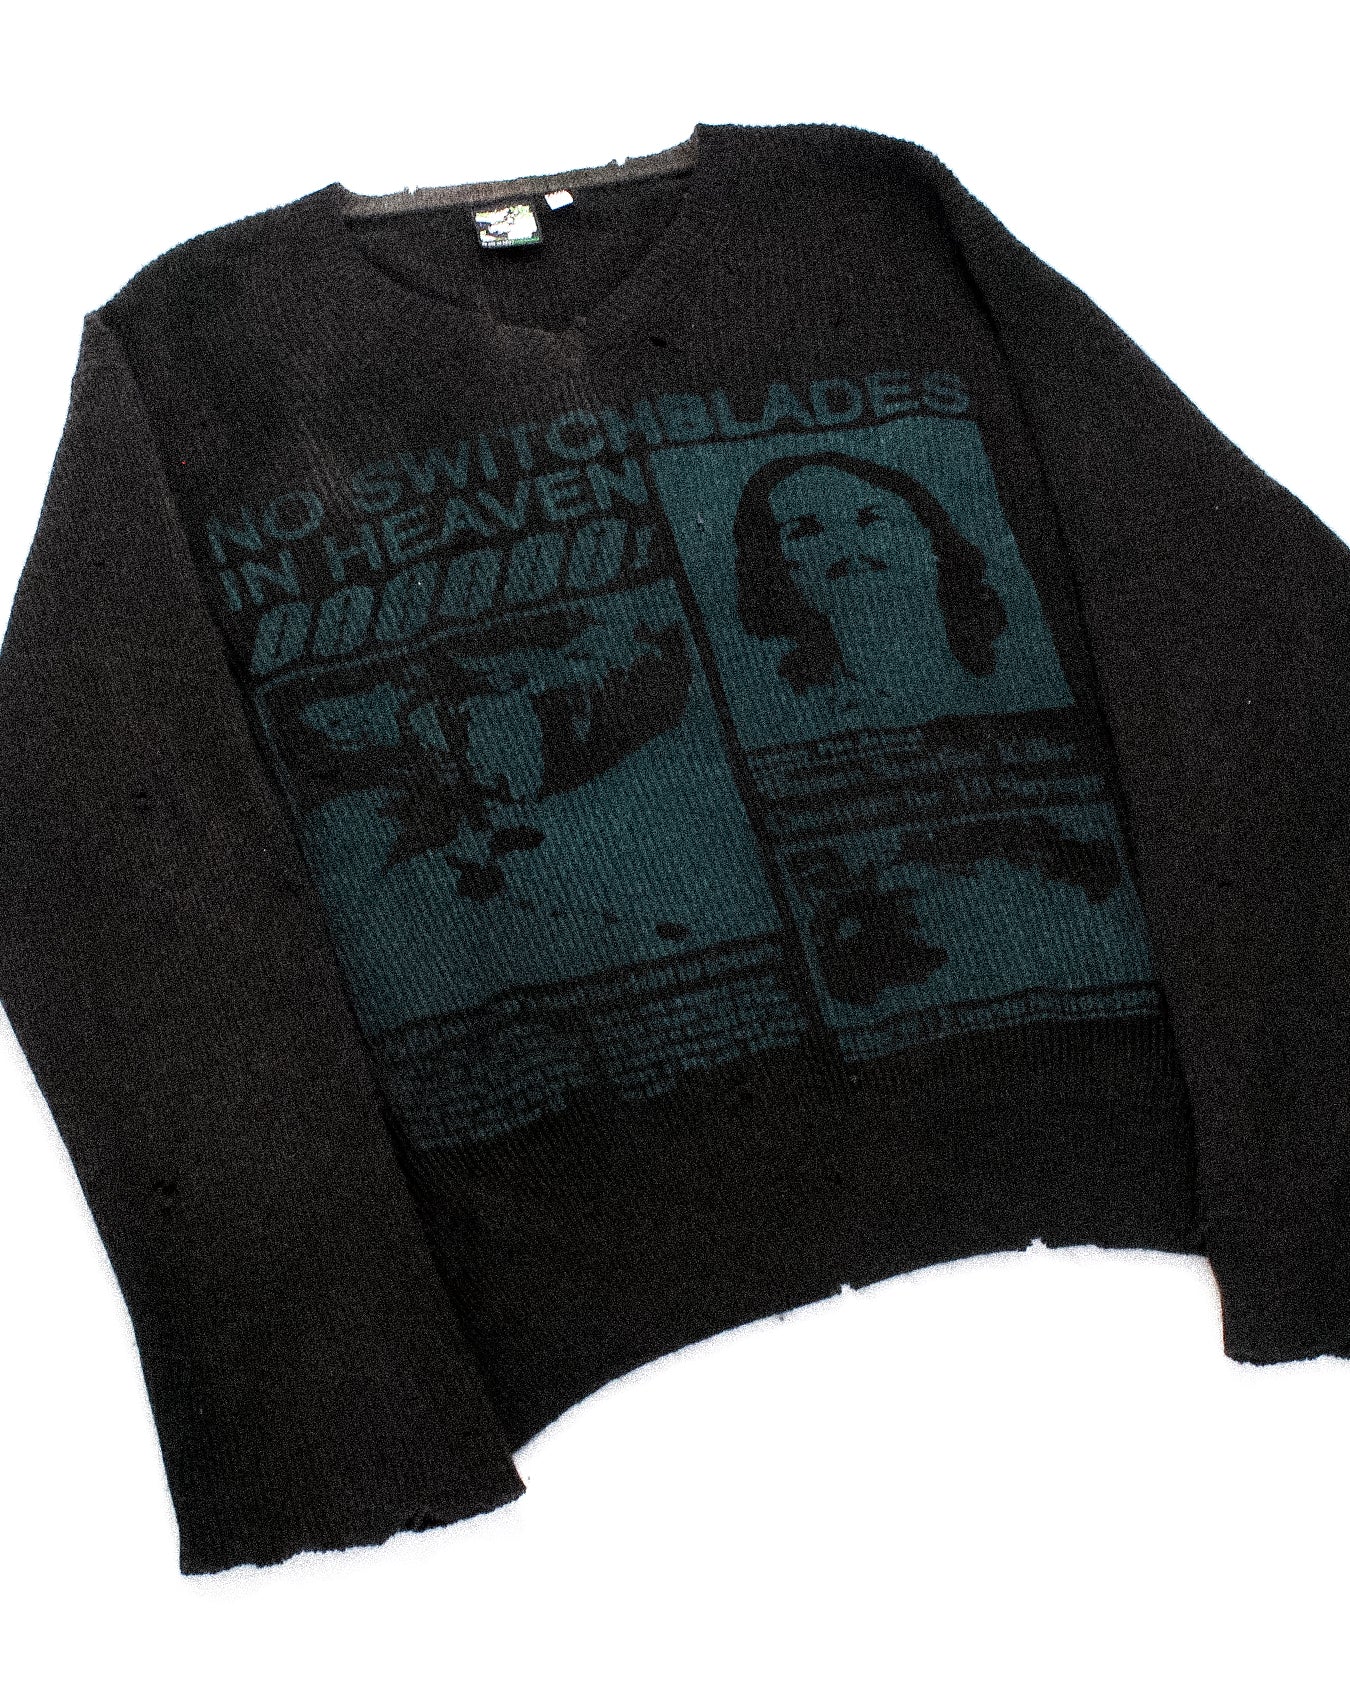 "NO SWITCHBLADES IN HEAVEN" Thrashed & Cropped Knit Sweater (XL)